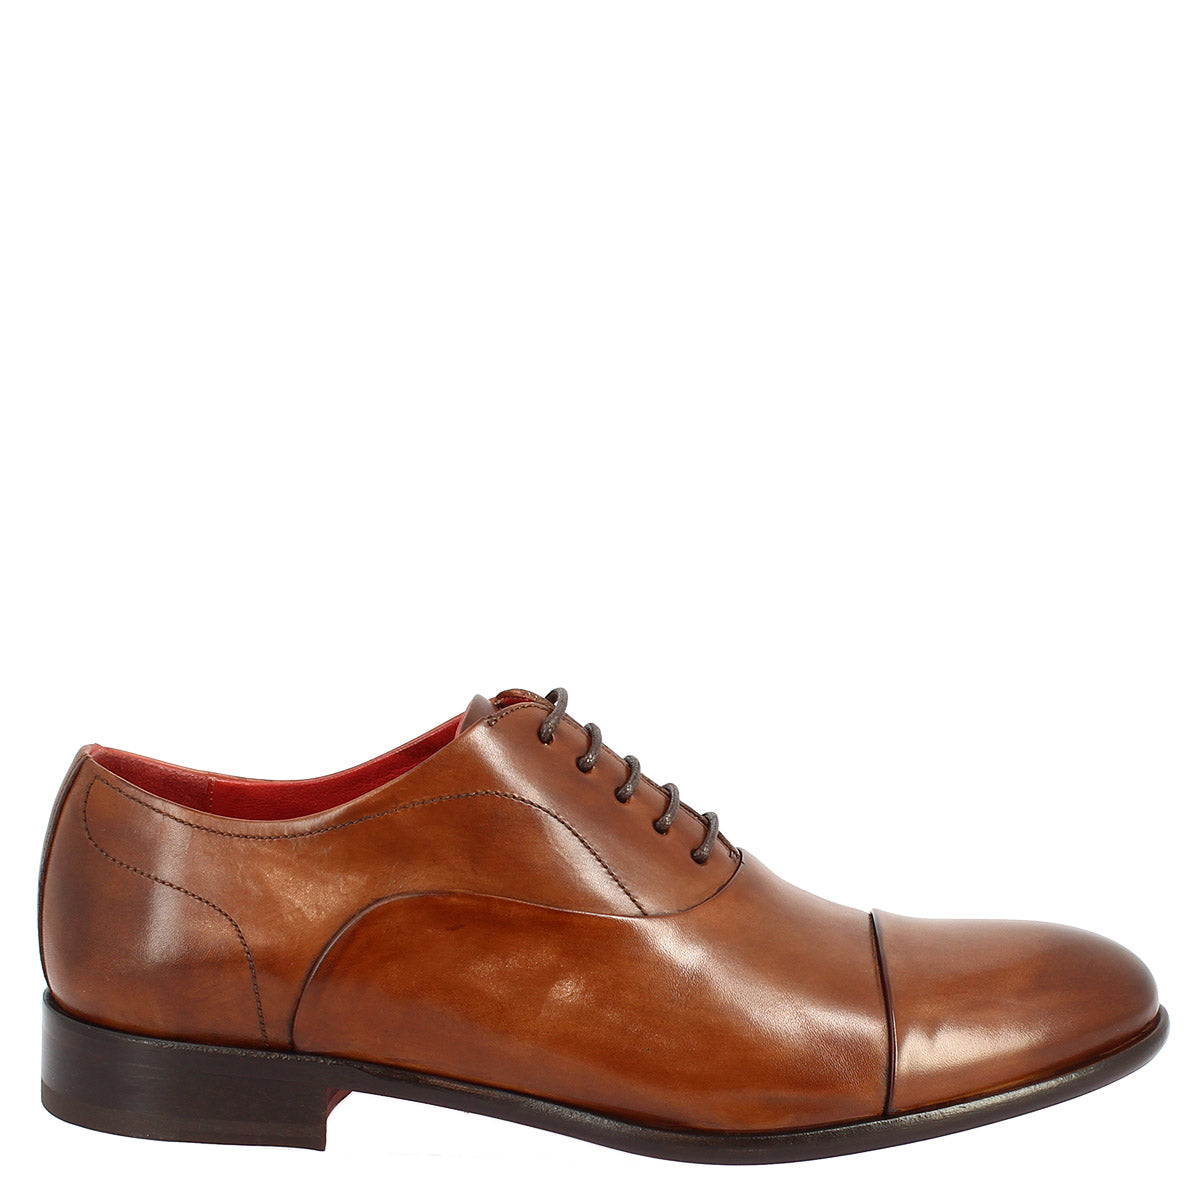 Men's lace-up shoes handmade in brandy leather